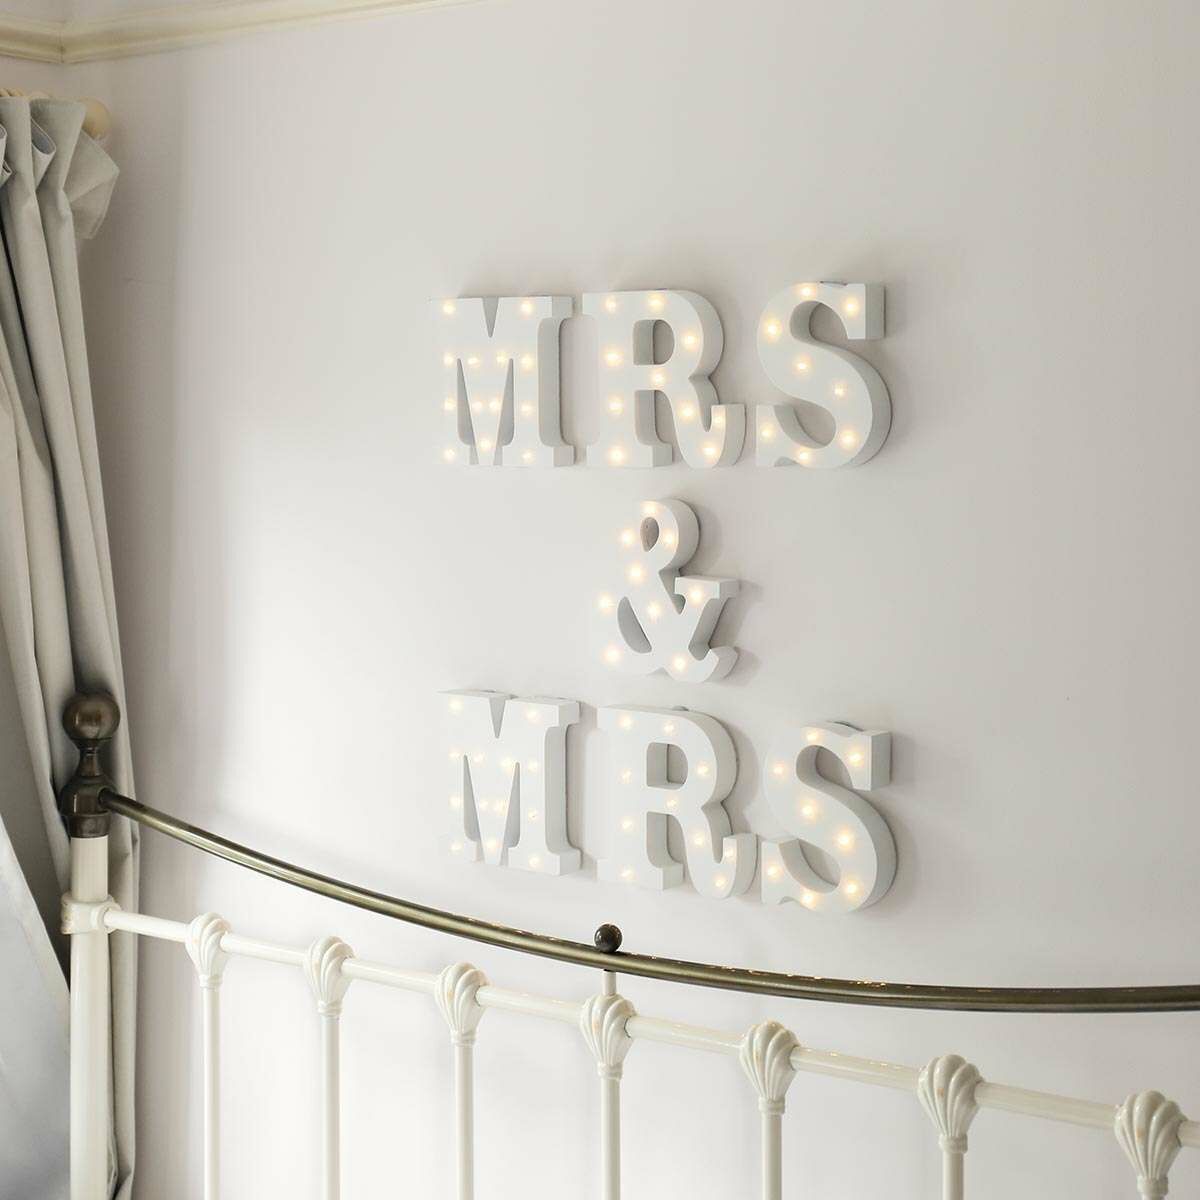 Mrs & Mrs Battery Light Up Circus Letters, Warm White LEDs image 3